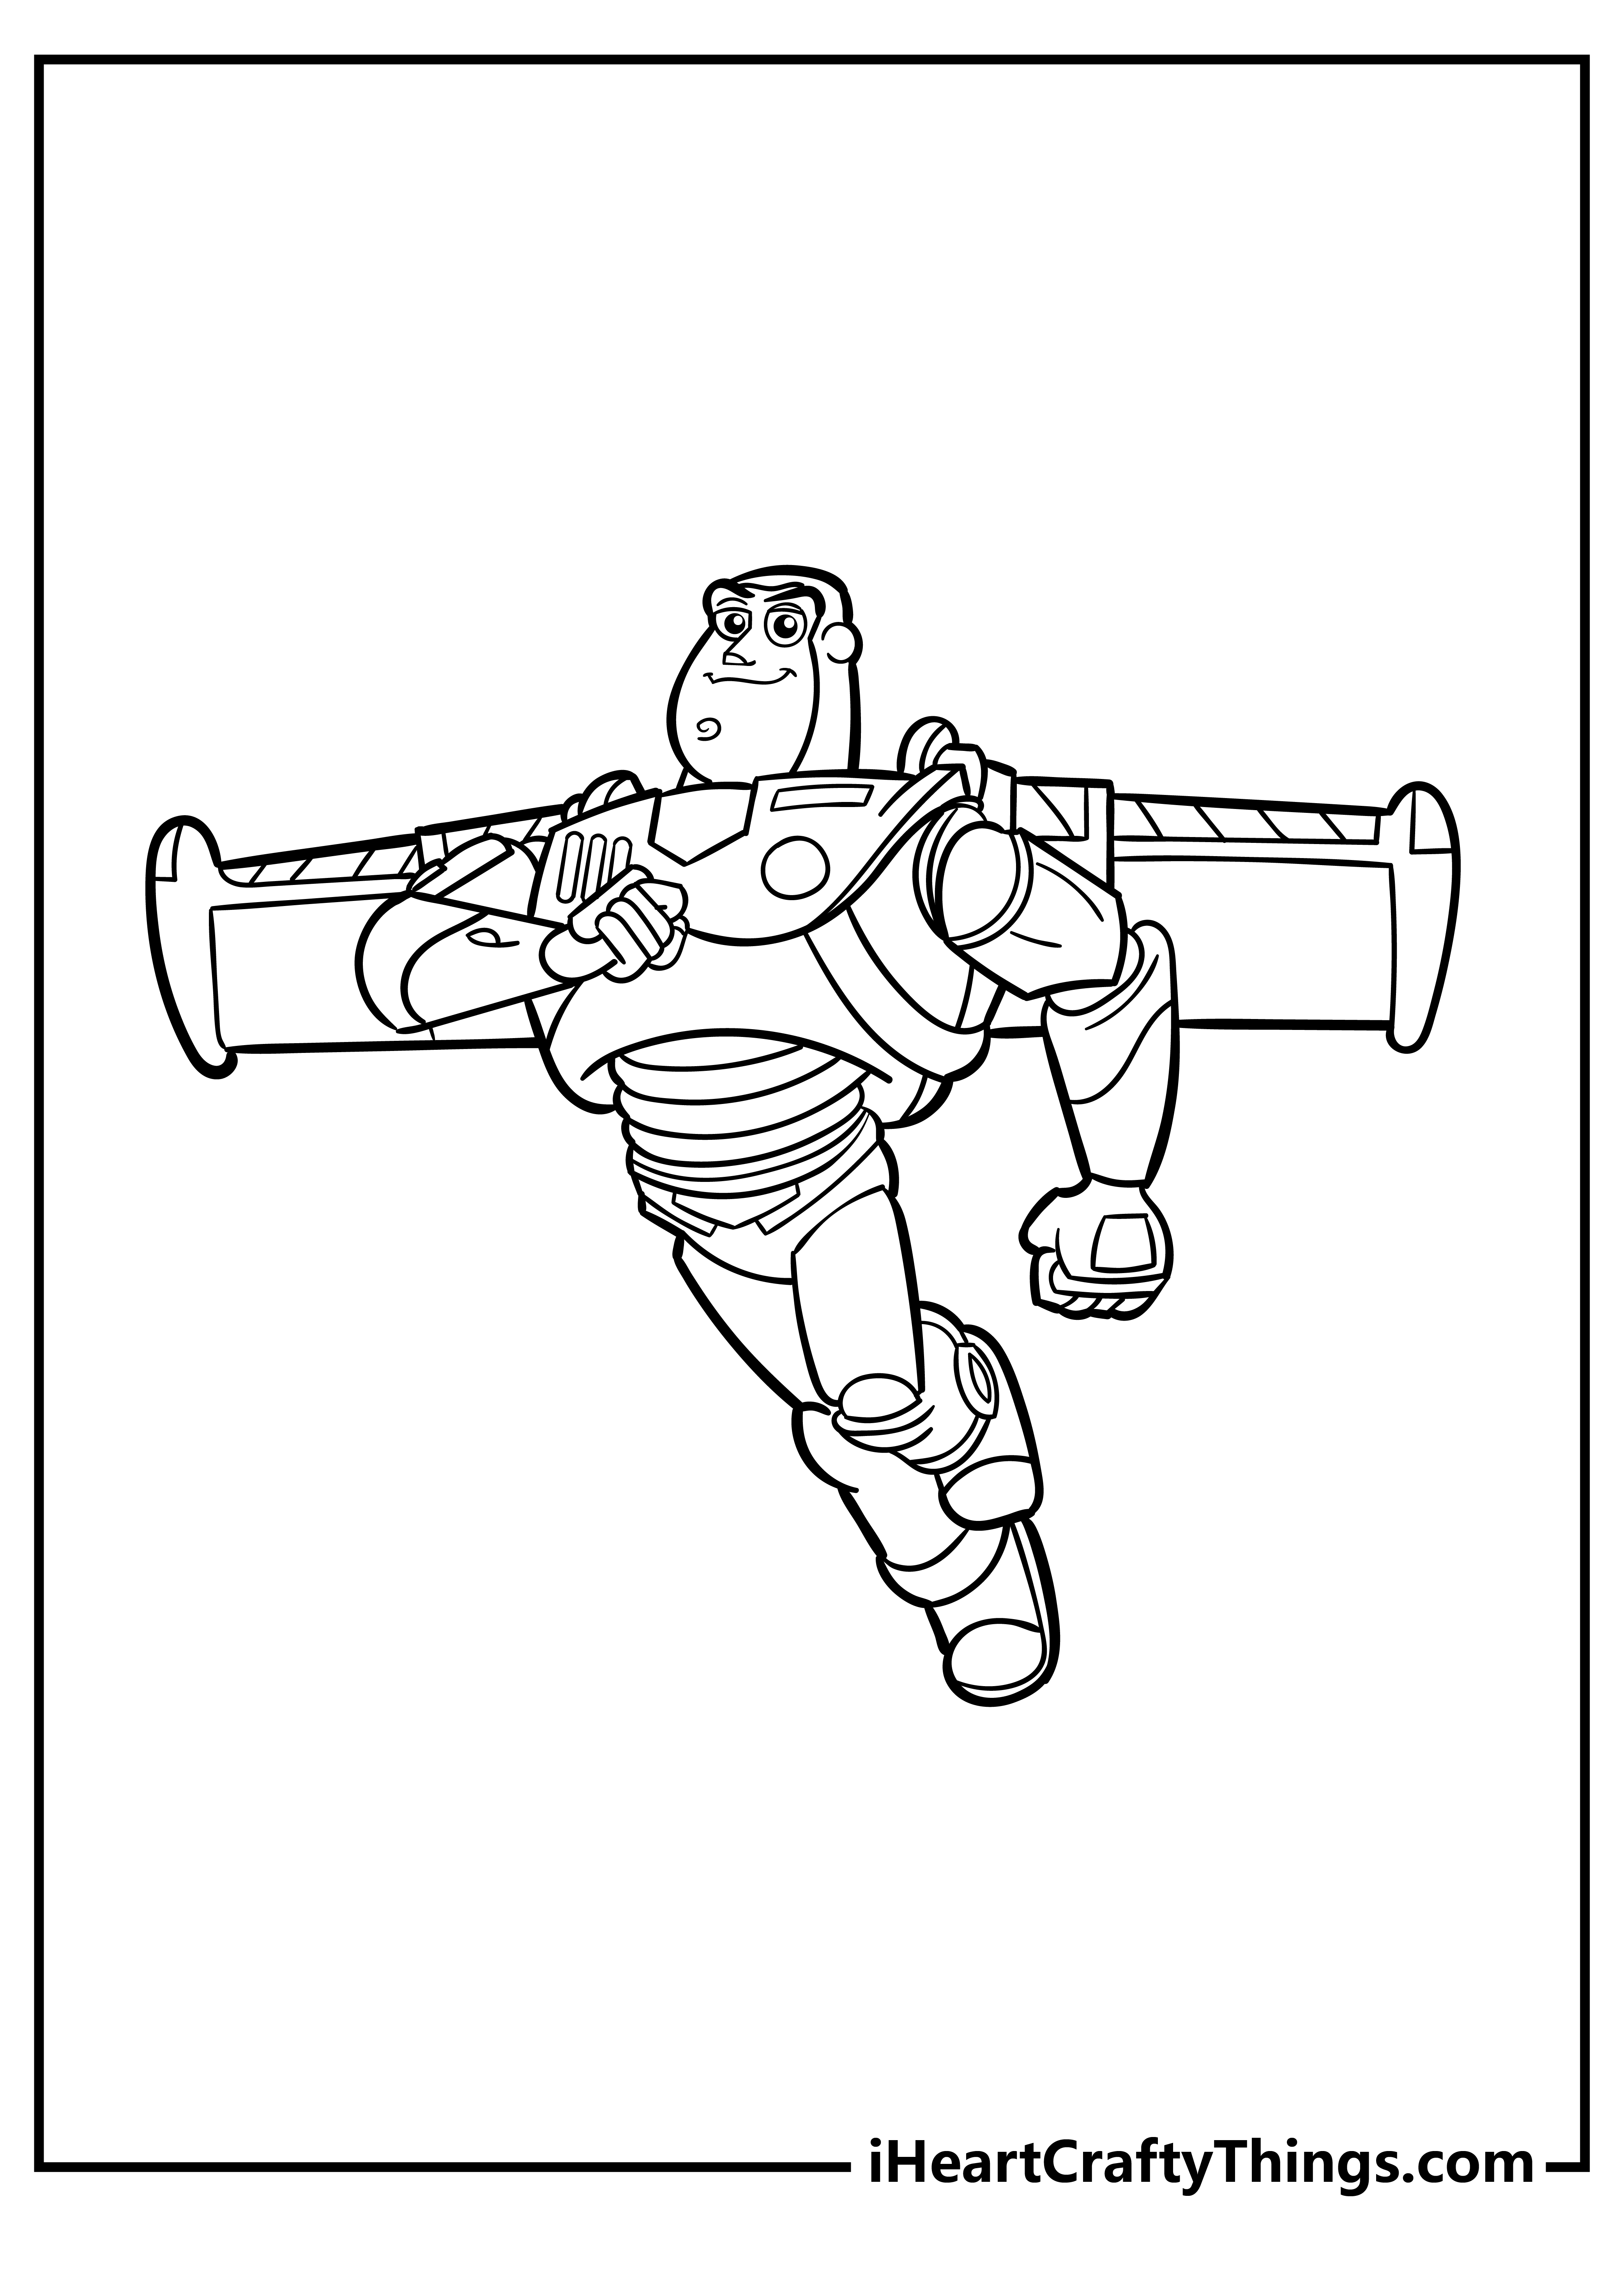 Buzz Lightyear Cartoon Coloring Pages for preschoolers free printable